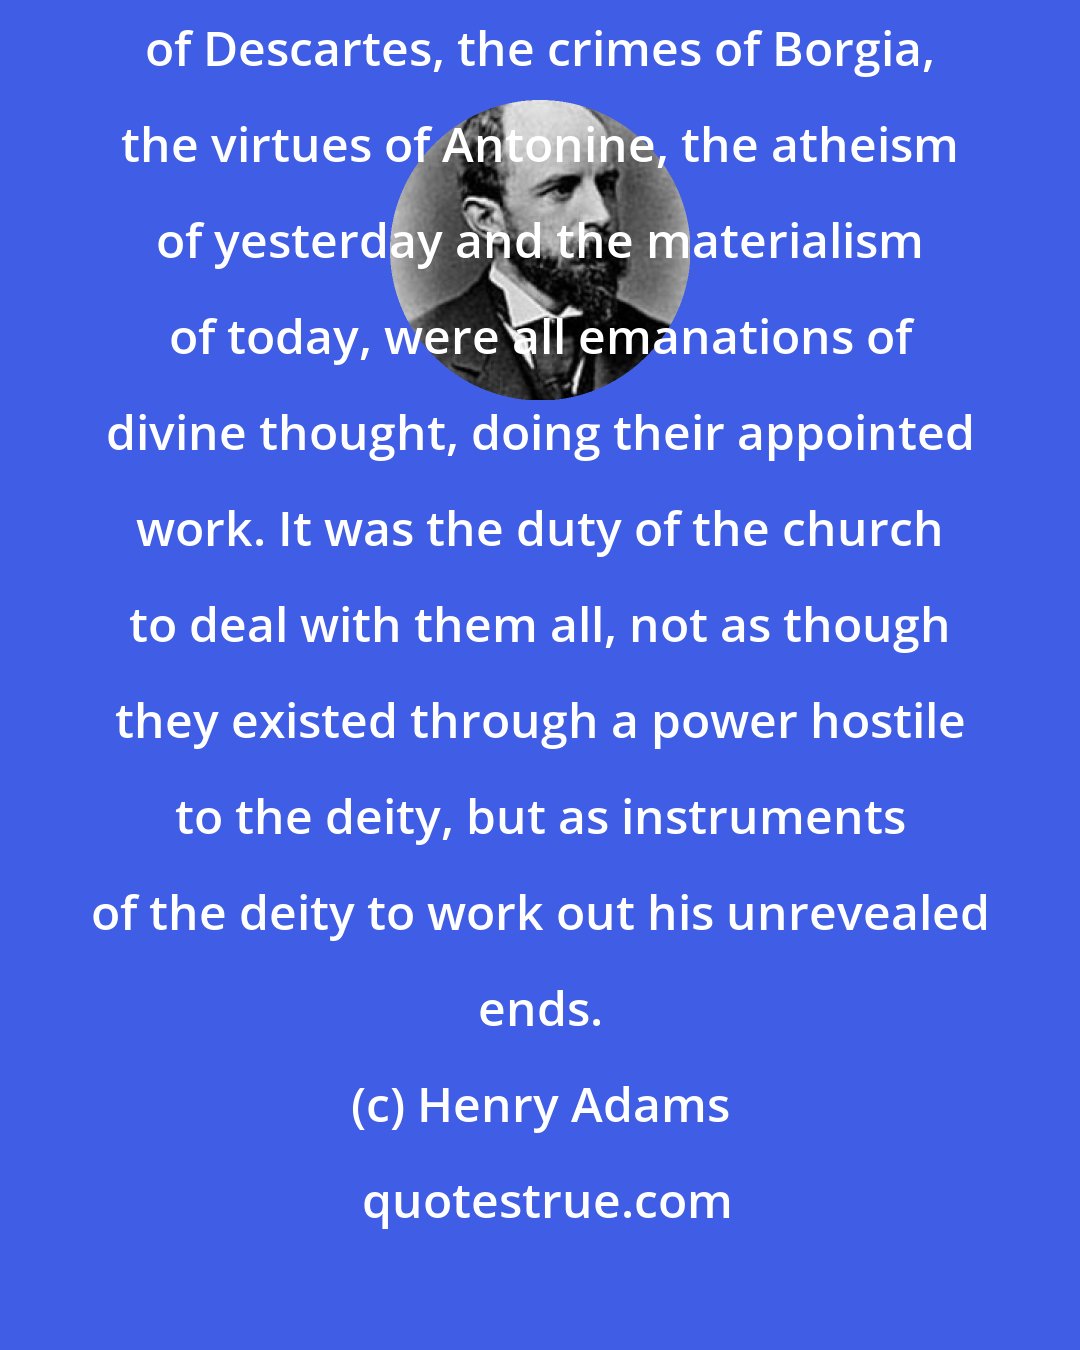 Henry Adams: The hymns of David, the plays of Shakespeare, the metaphysics of Descartes, the crimes of Borgia, the virtues of Antonine, the atheism of yesterday and the materialism of today, were all emanations of divine thought, doing their appointed work. It was the duty of the church to deal with them all, not as though they existed through a power hostile to the deity, but as instruments of the deity to work out his unrevealed ends.